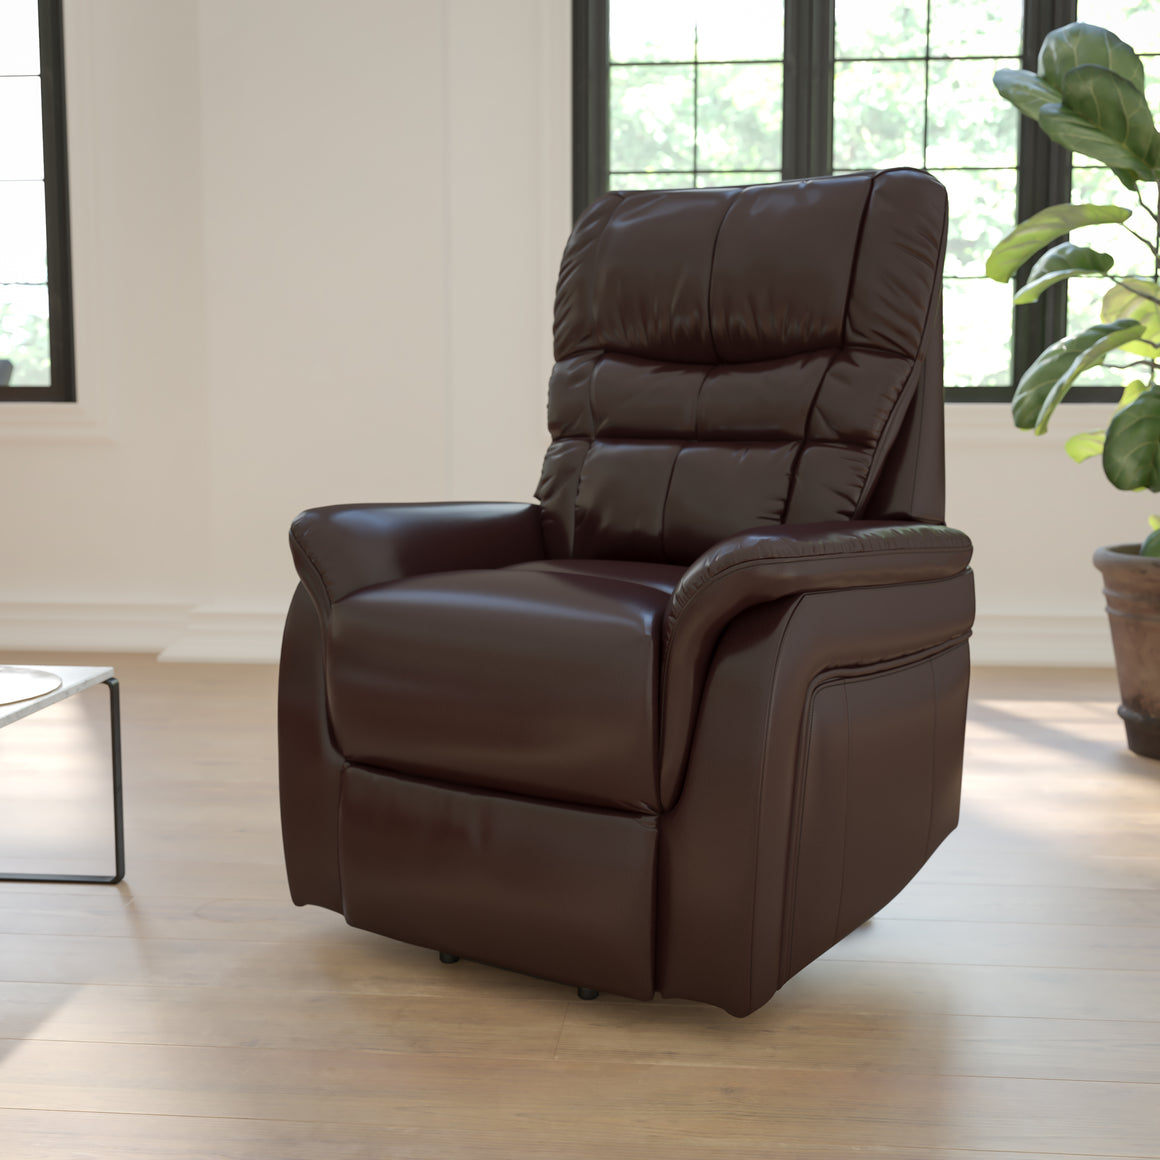 Power Lift Assist Recliner Chair Contemporary Style - Brown - Man Cave Boutique